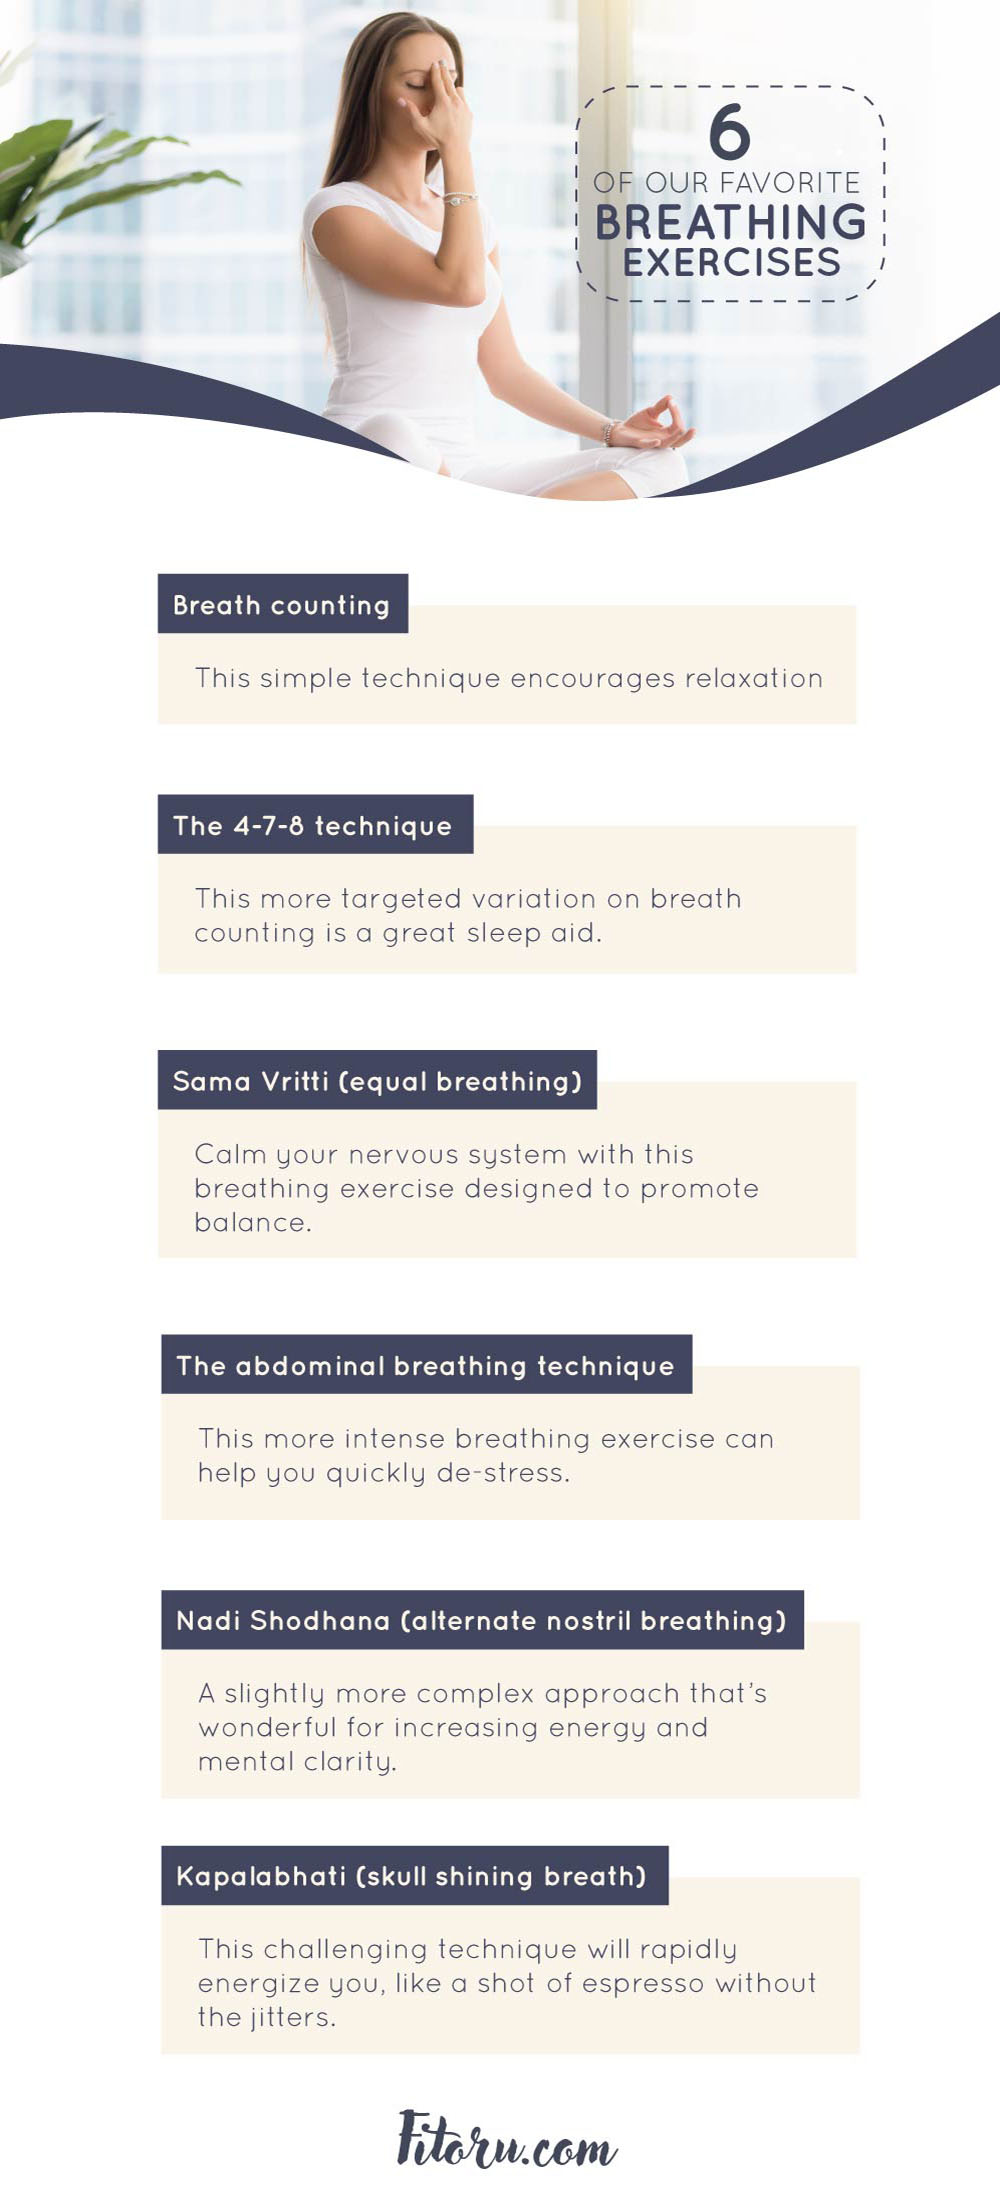 6 of Our Favorite Breathing Exercises